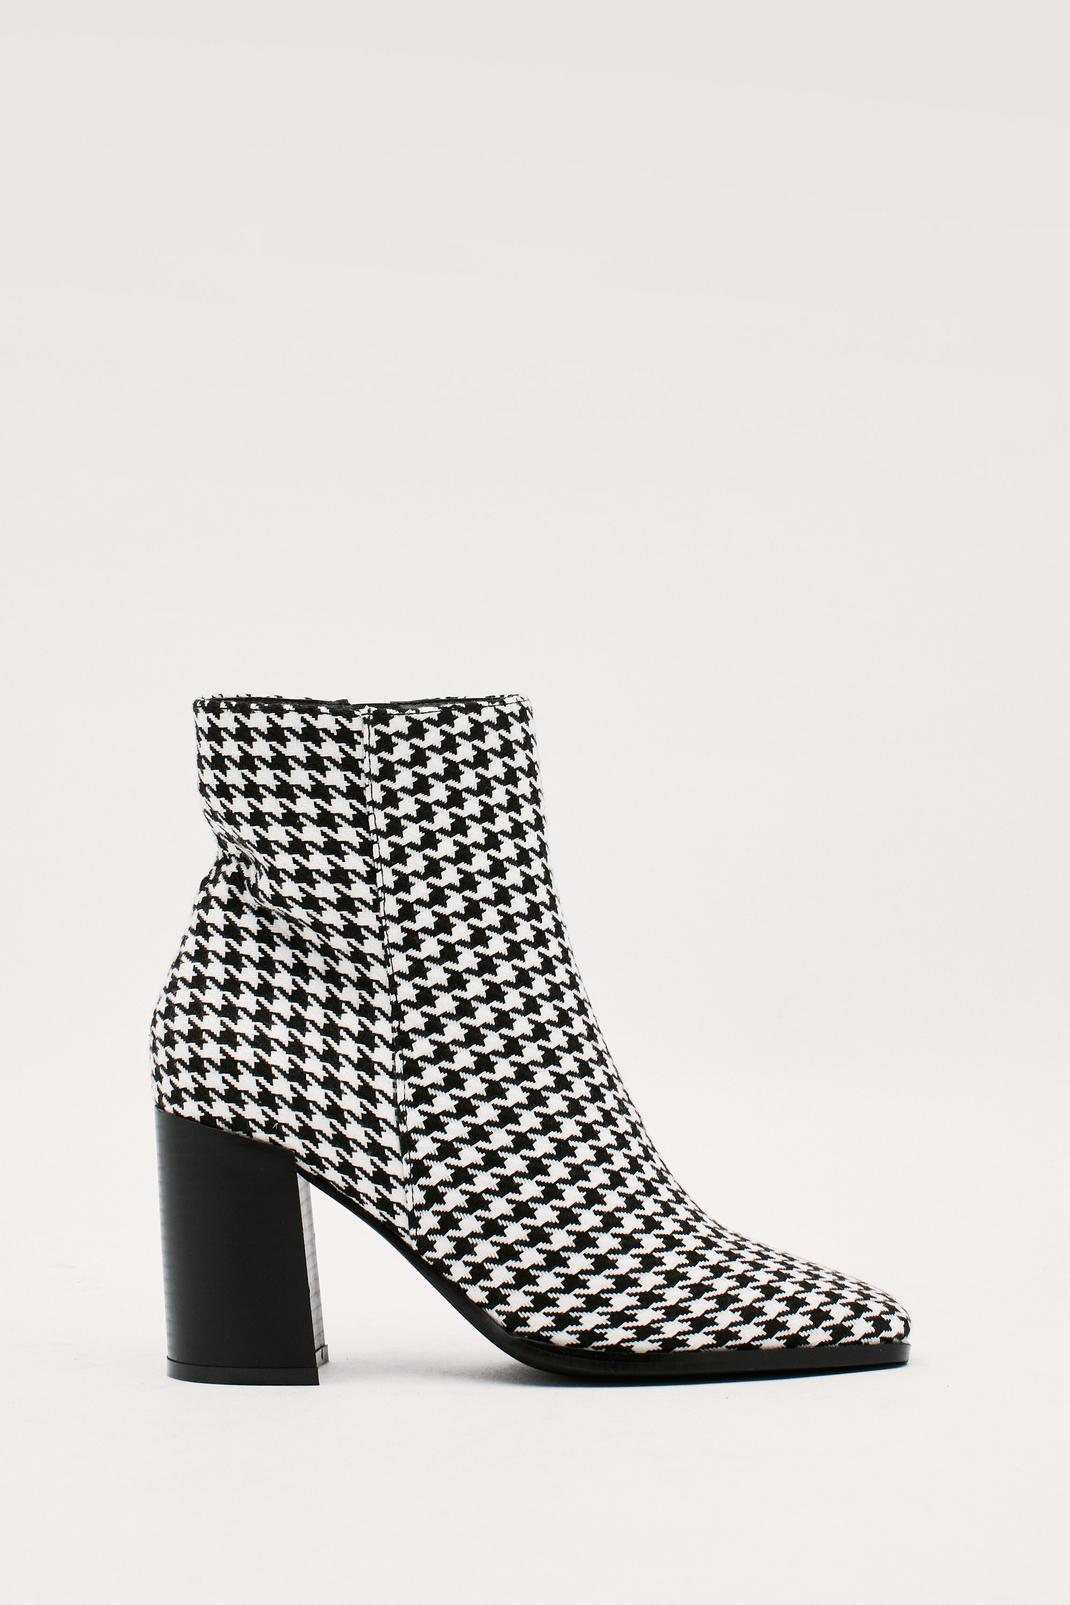 Houndstooth Square Toe Ankle Boots | Nasty Gal